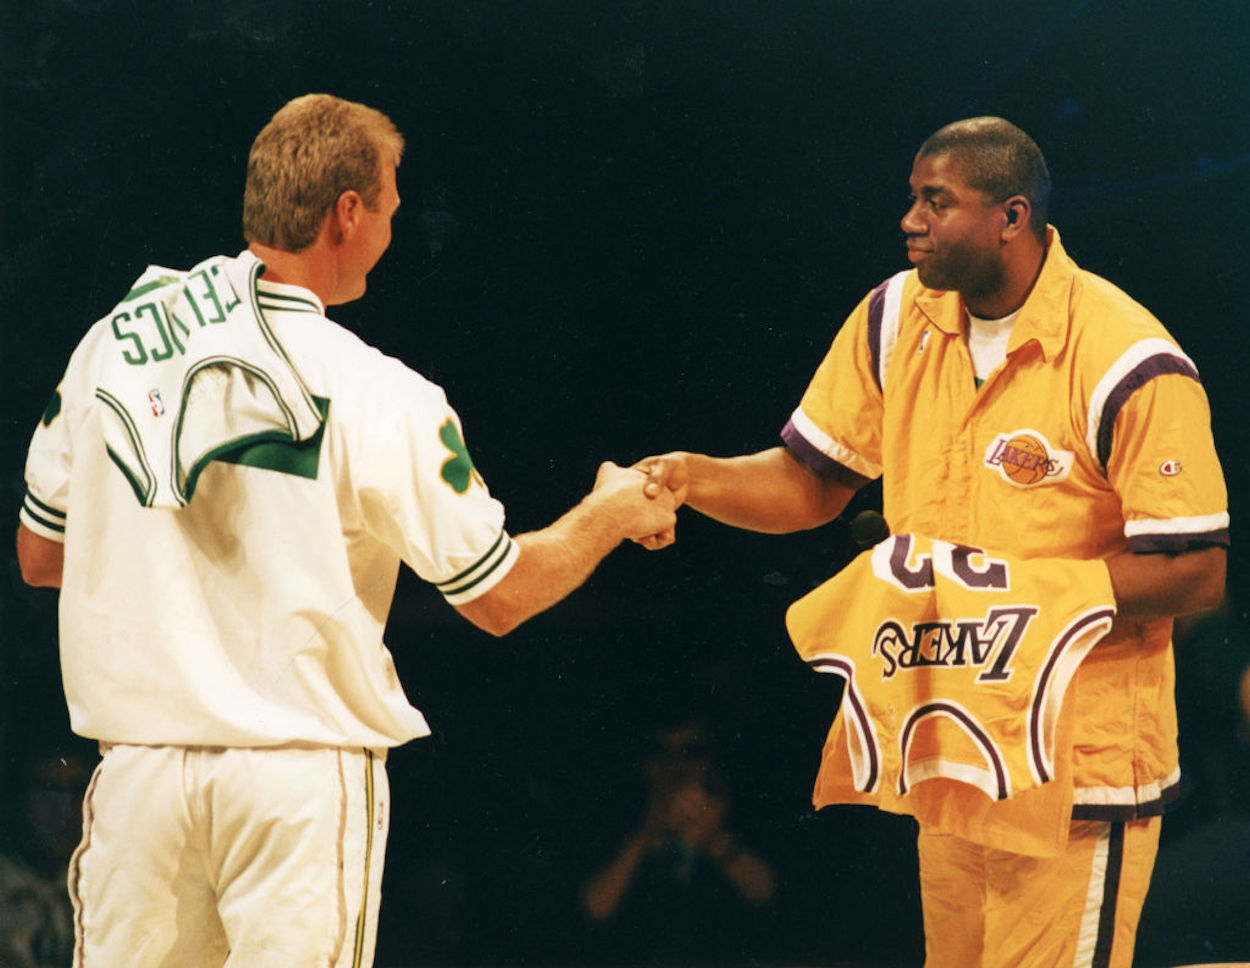 Larry Bird (L) and Magic Johnson (R) shake hands in 1993.